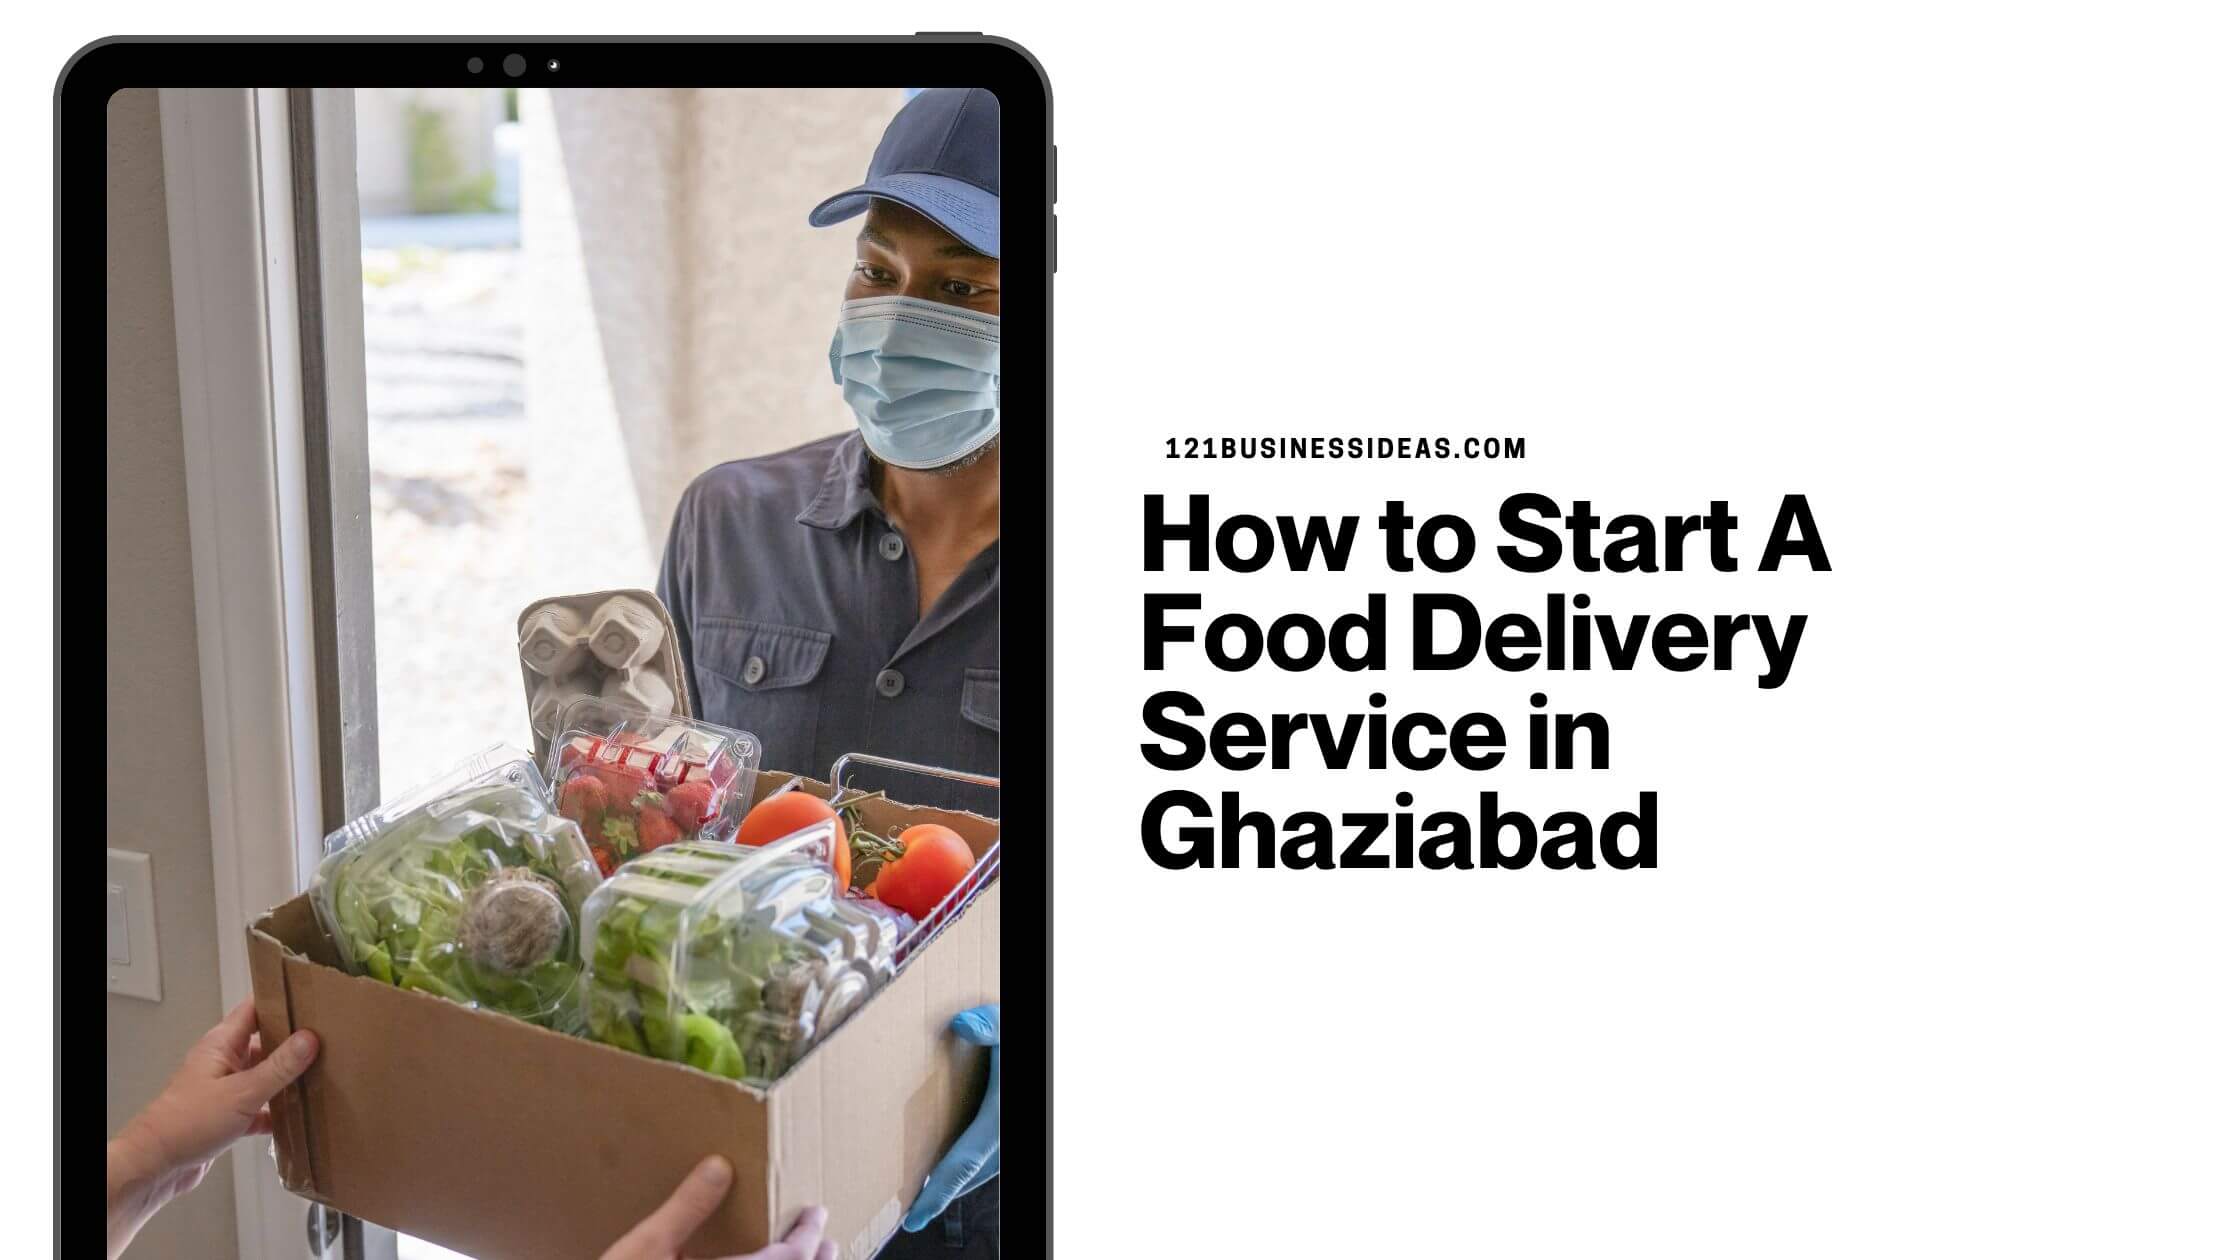 How to Start A Food Delivery Service in Ghaziabad (1)